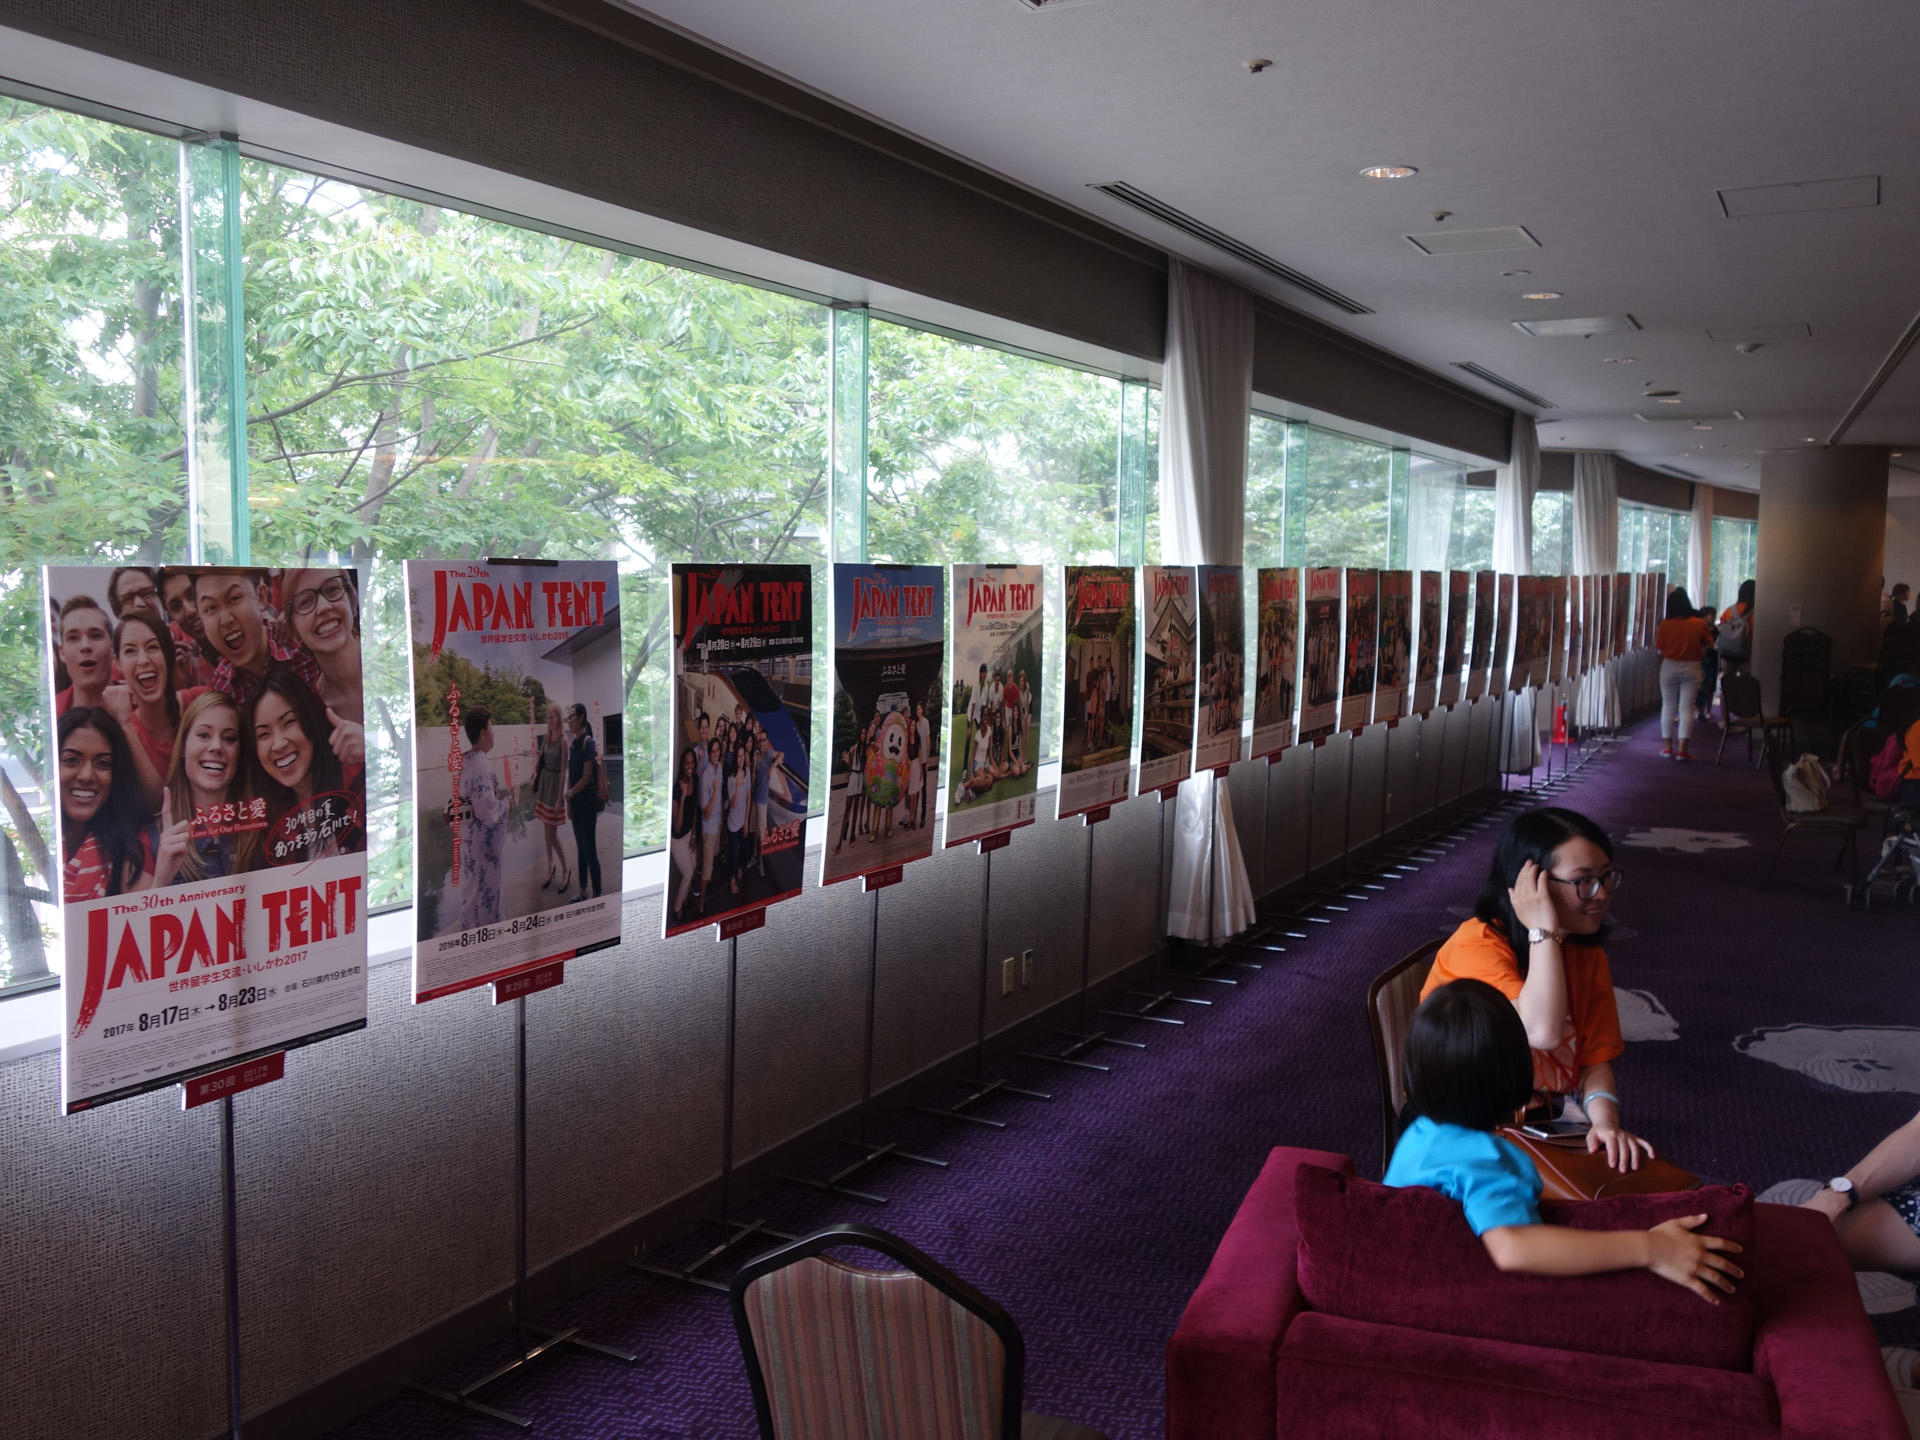 All past Japan TENT posters lined up at its 30th anniversary.